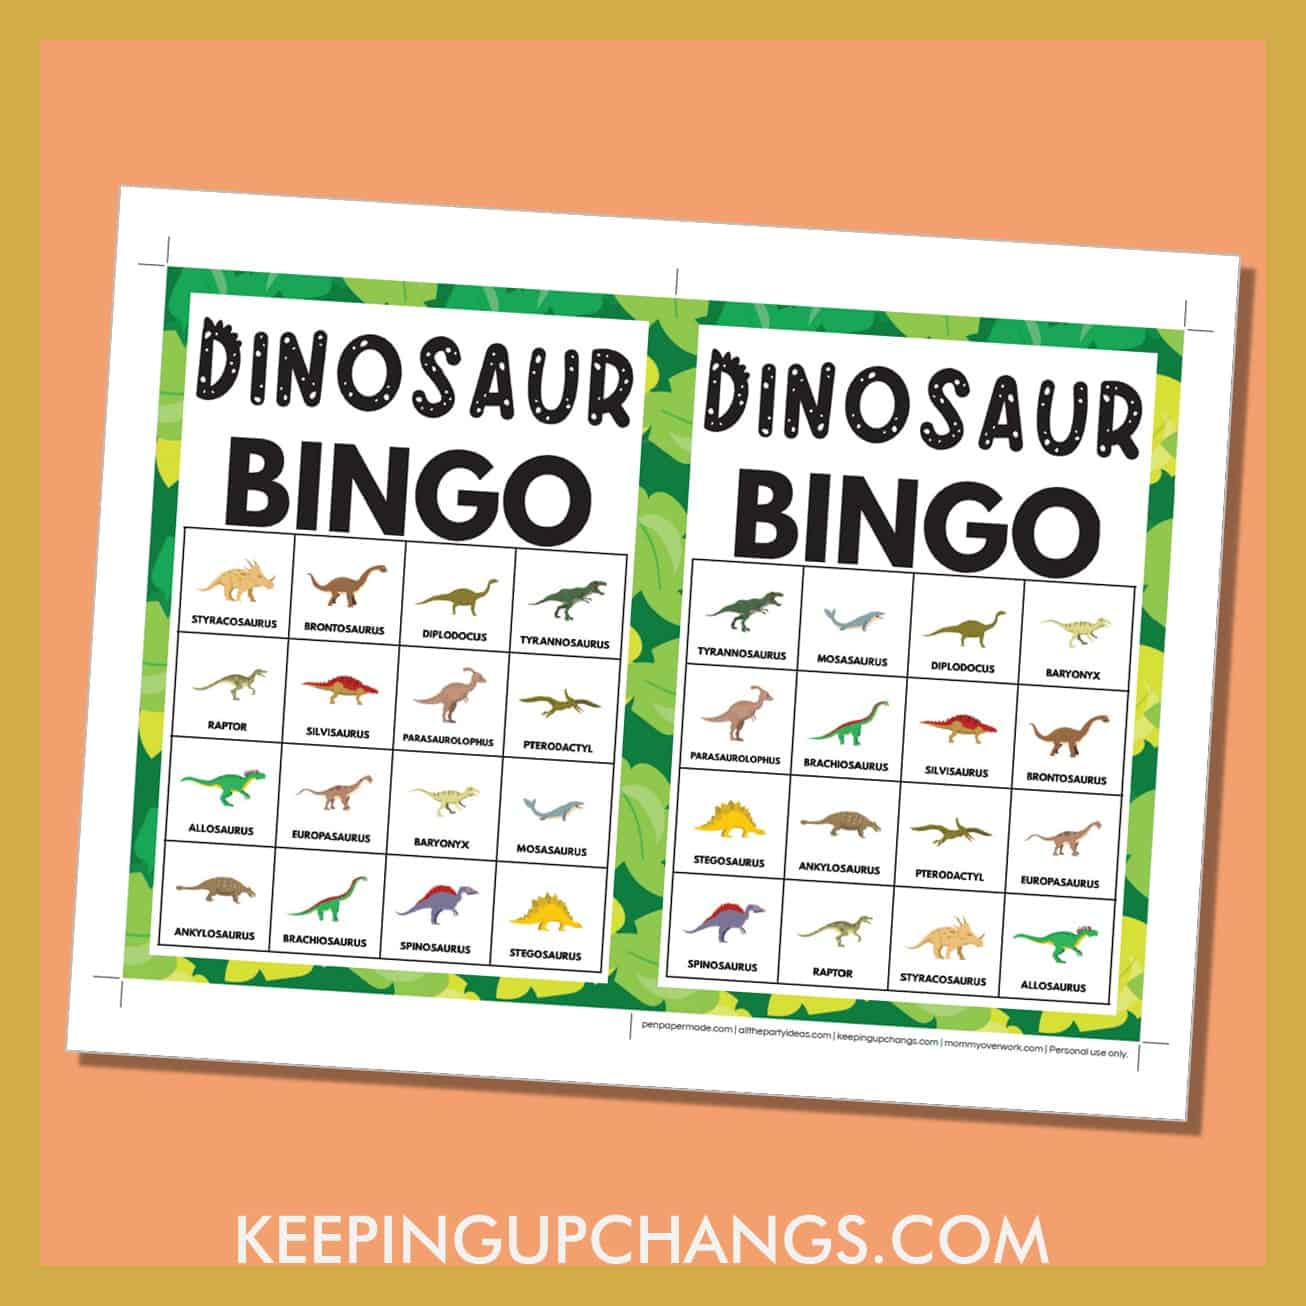 free dinosaur bingo card 4x4 5x7 game boards with images and text words.